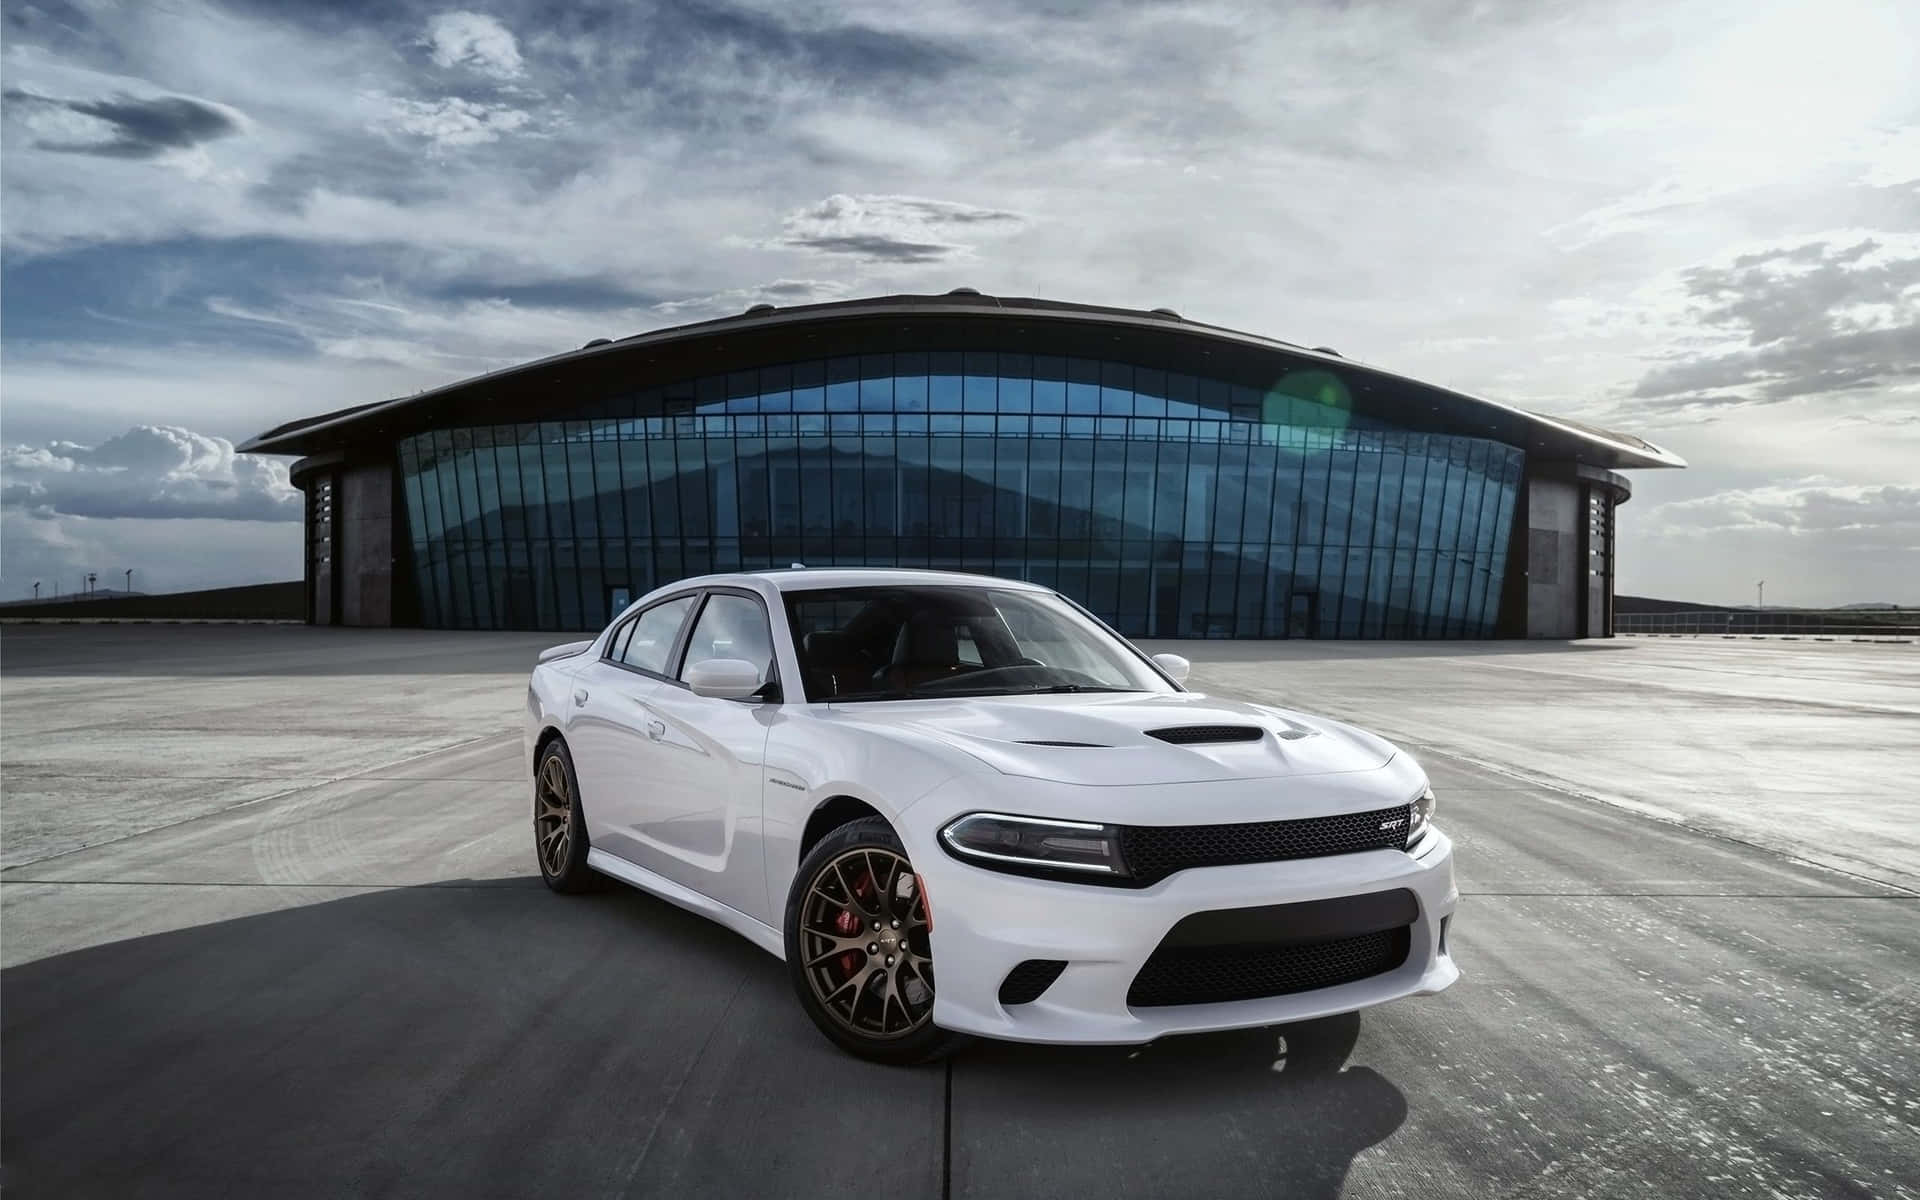 Bold and Powerful - Dodge Charger in Action Wallpaper